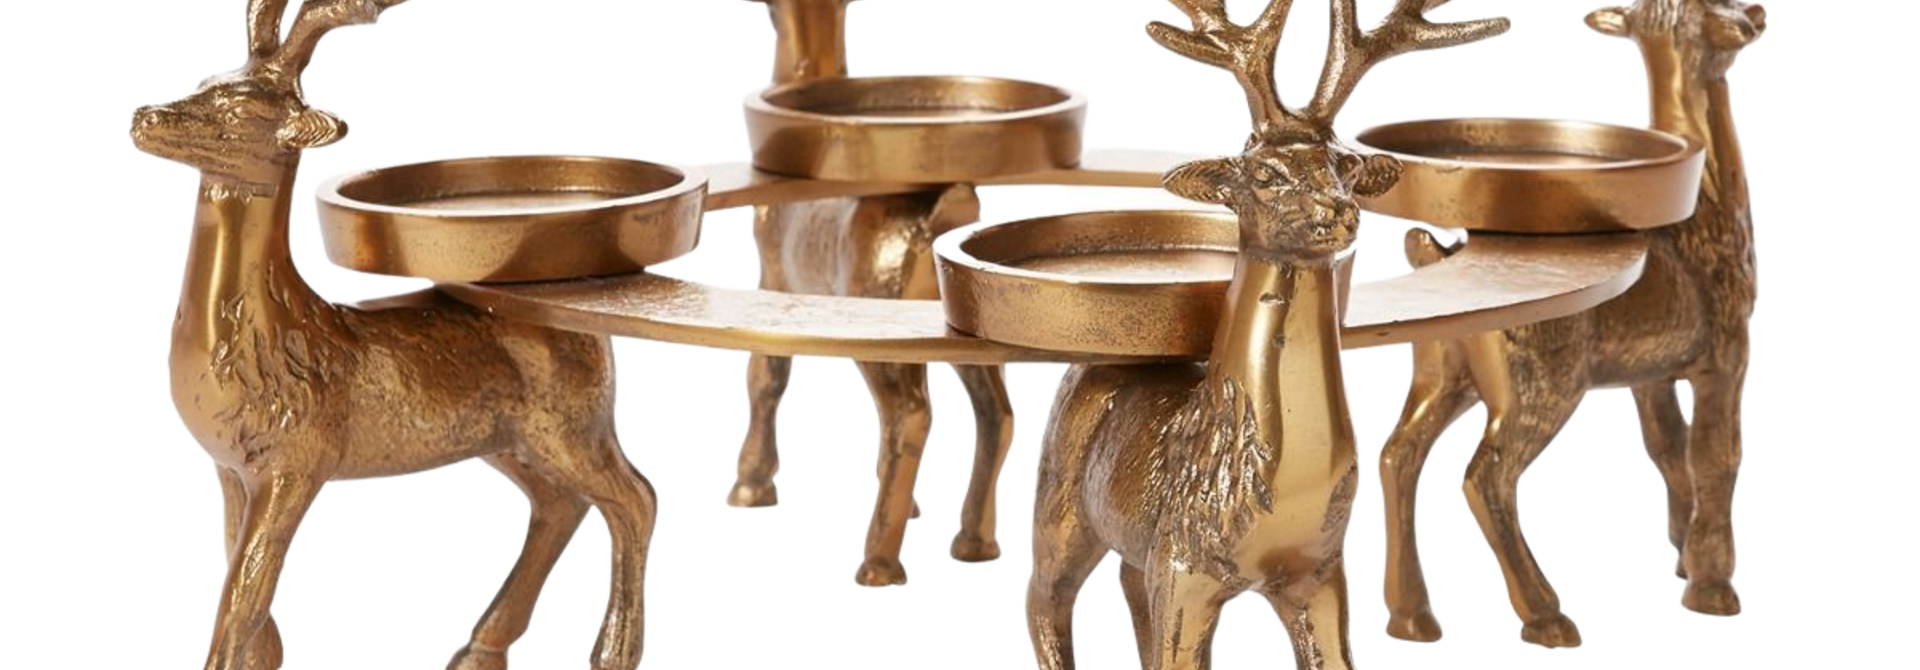 Reindeer | The Candle Holder Collection, Antique Gold - 19.5 Inch x 15 Inch x 11 Inch